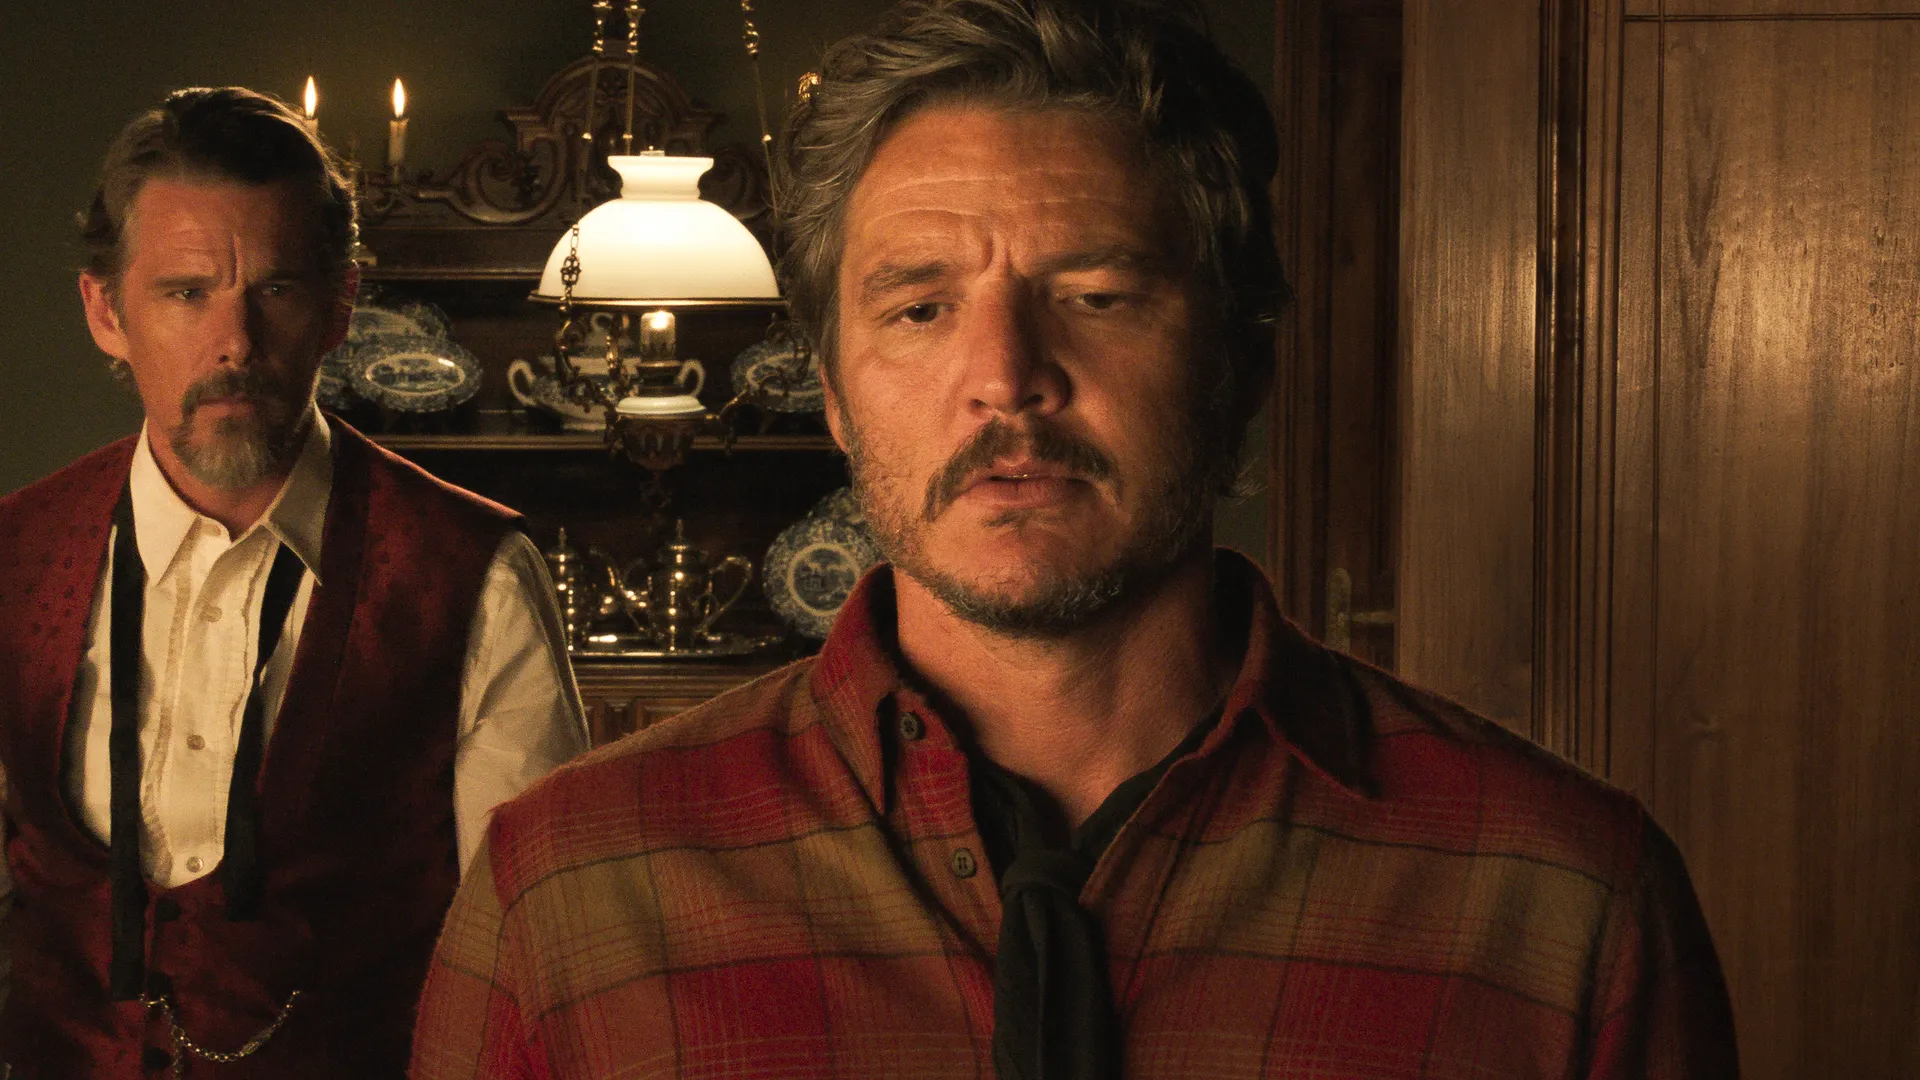 A still from Strange Way of Life with Pedro Pascal in the center. Behind him is Ethan Hawke.